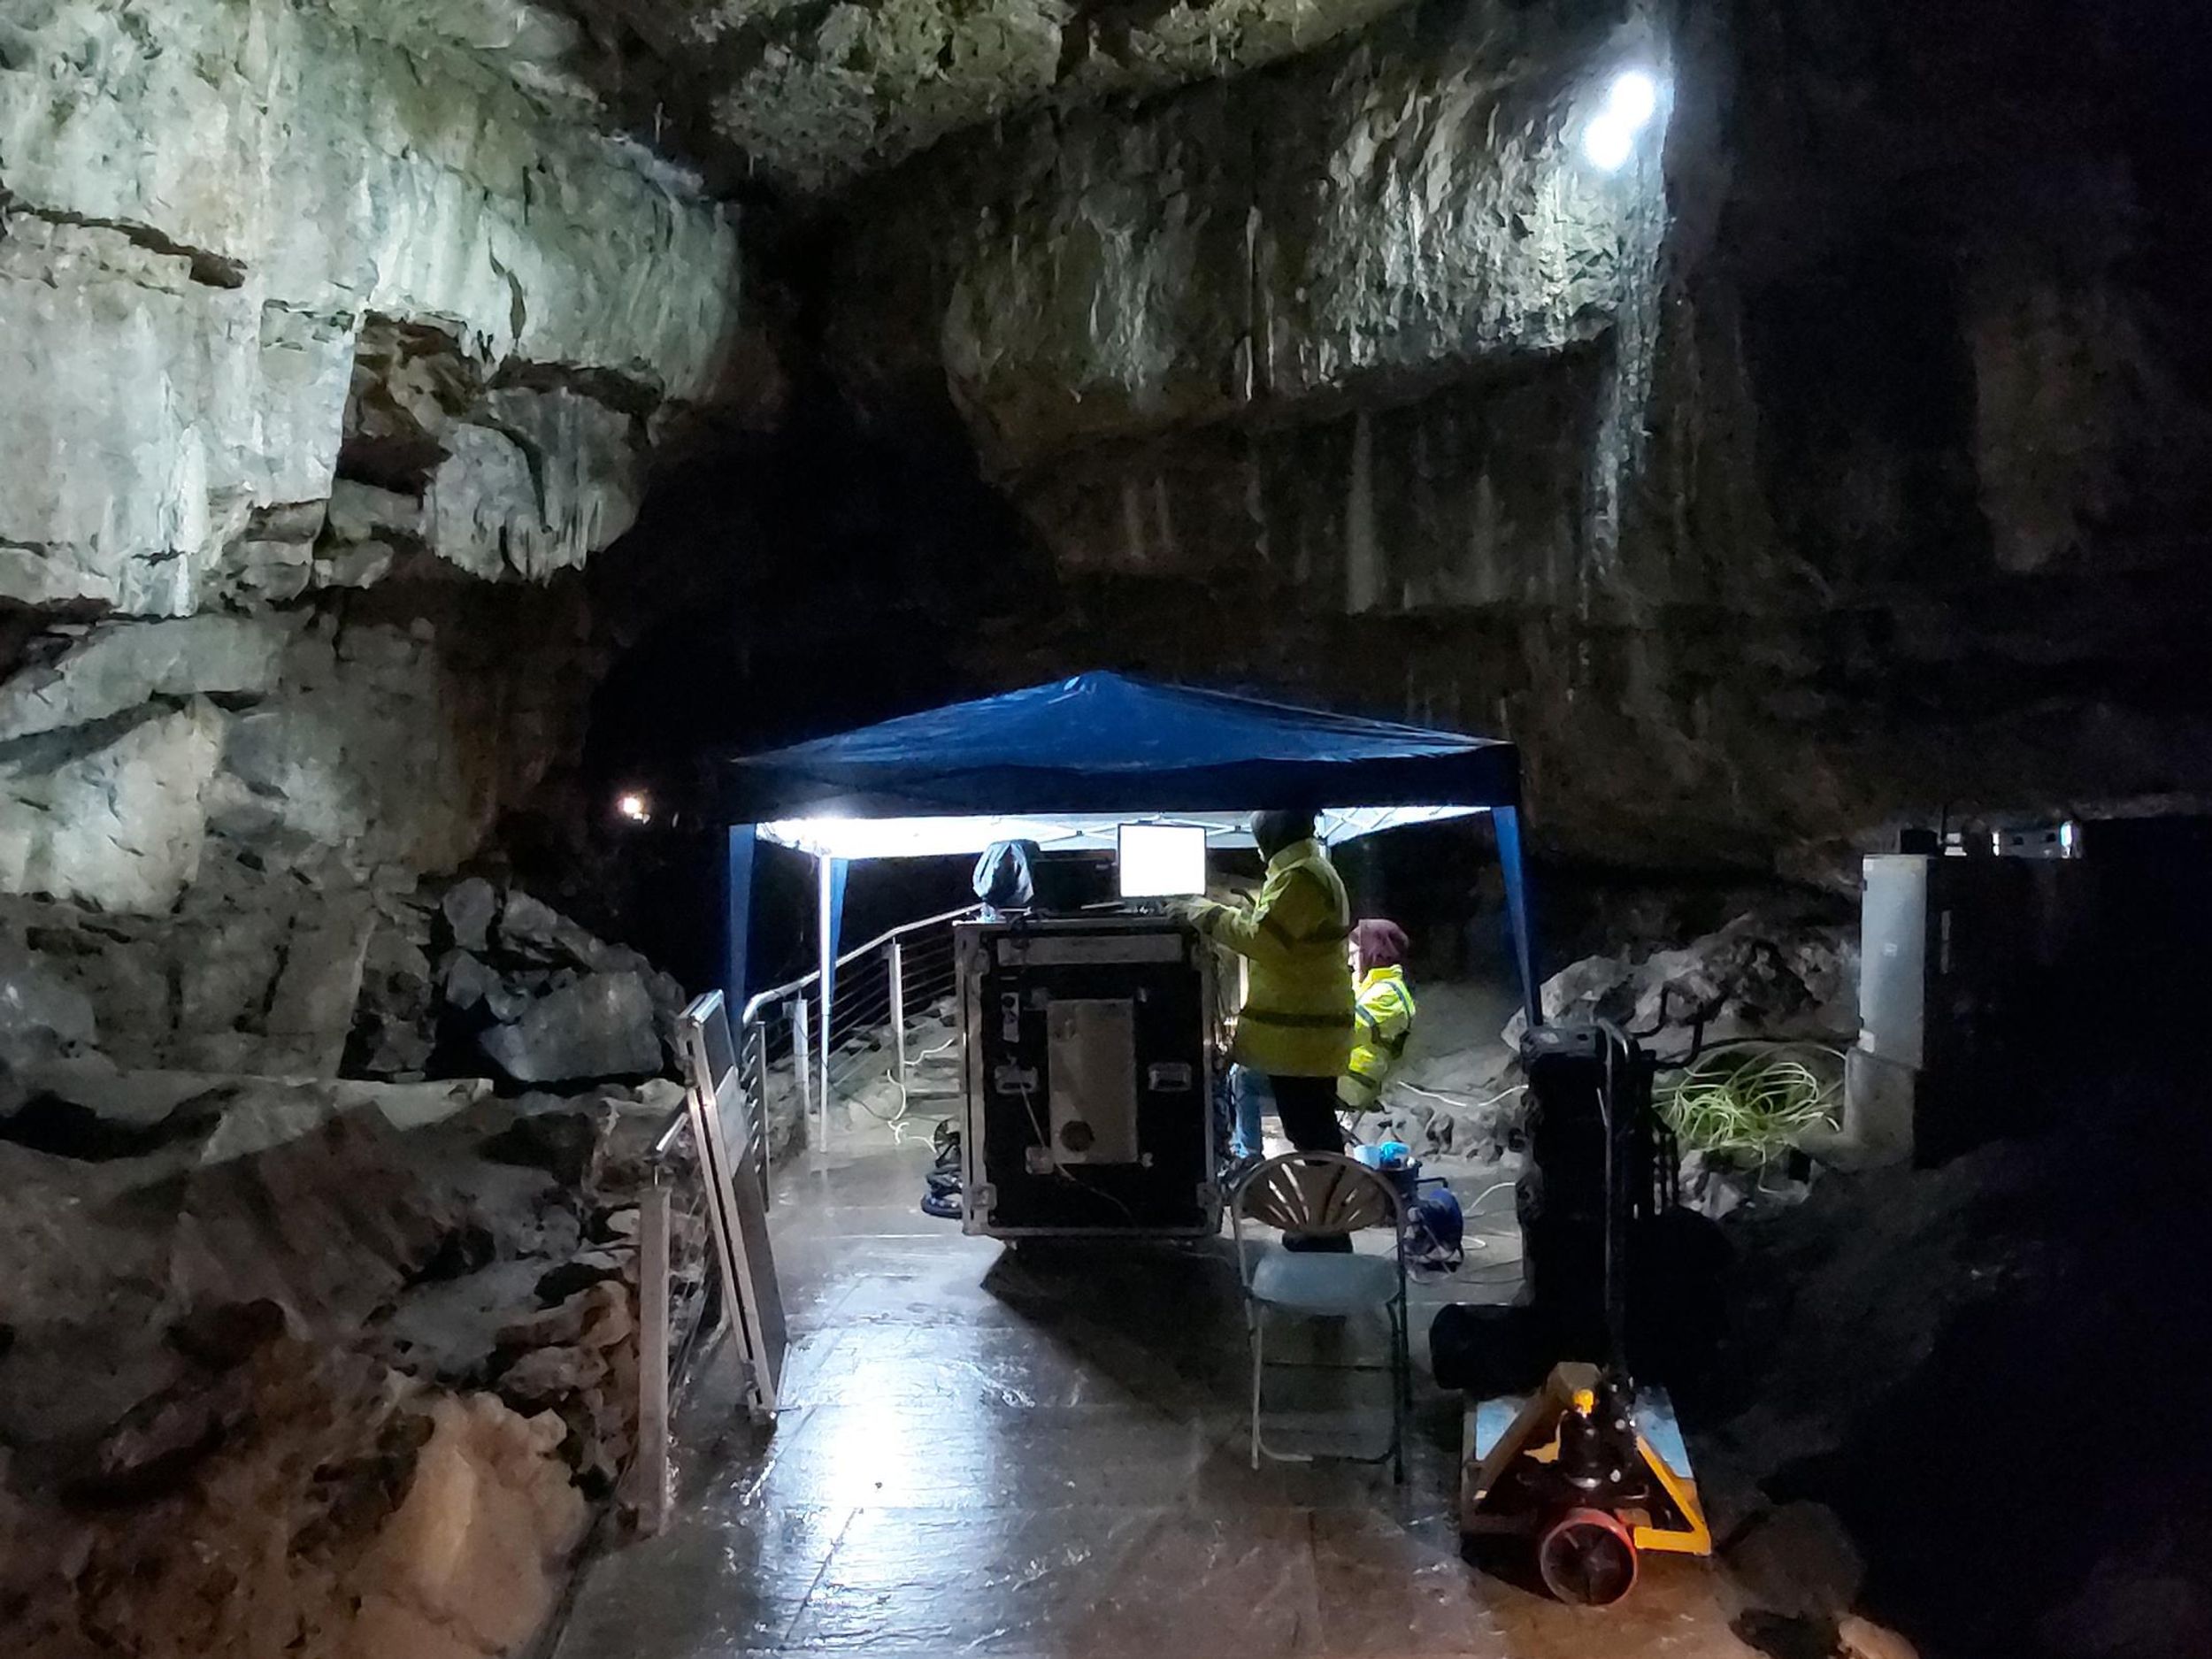 Photo of researchers in an underground geological formation, standing underneath portable tarp with boxes full of equipment